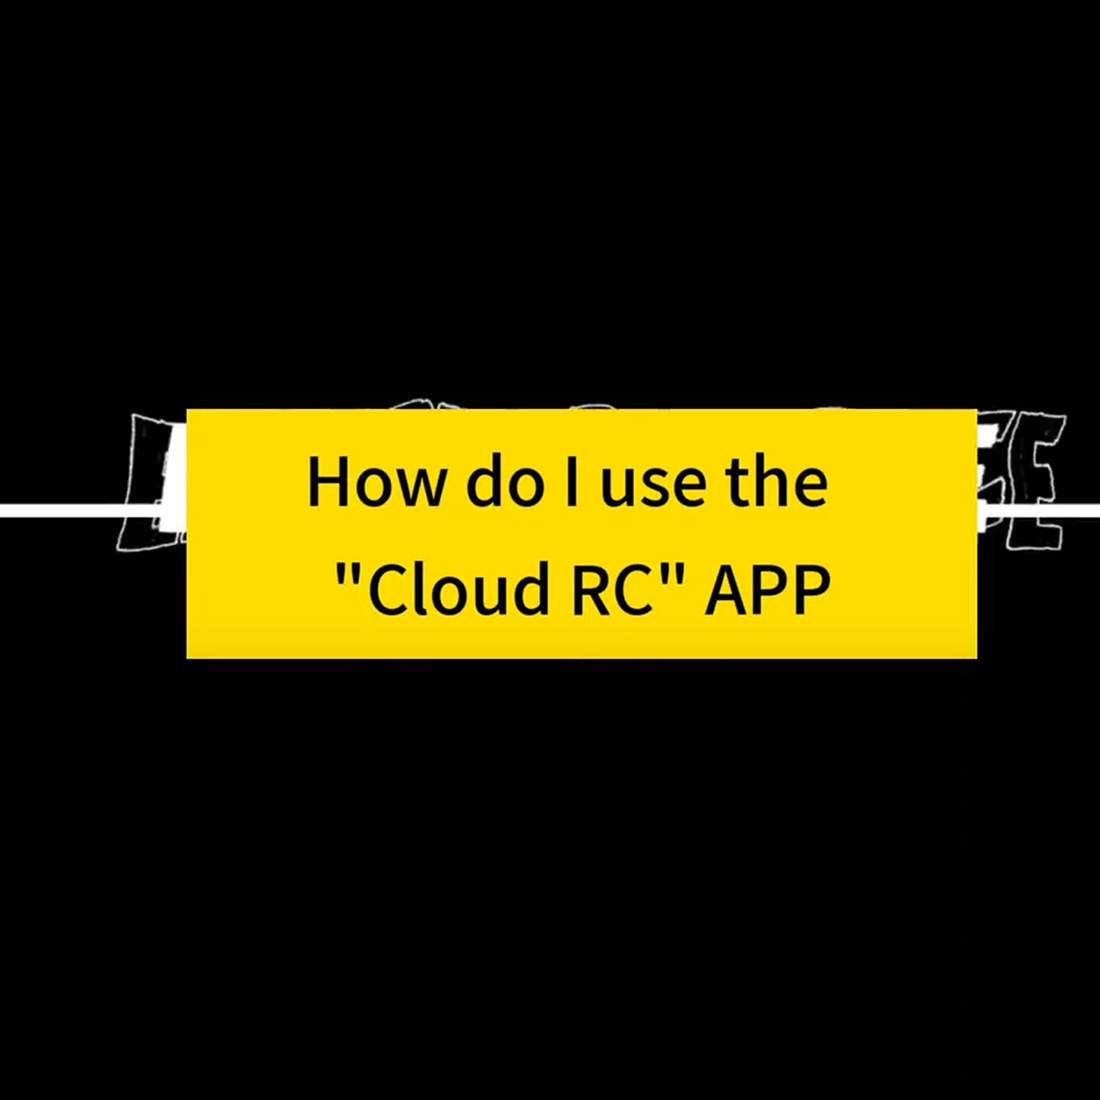 Instructions for Use CloudRC APP